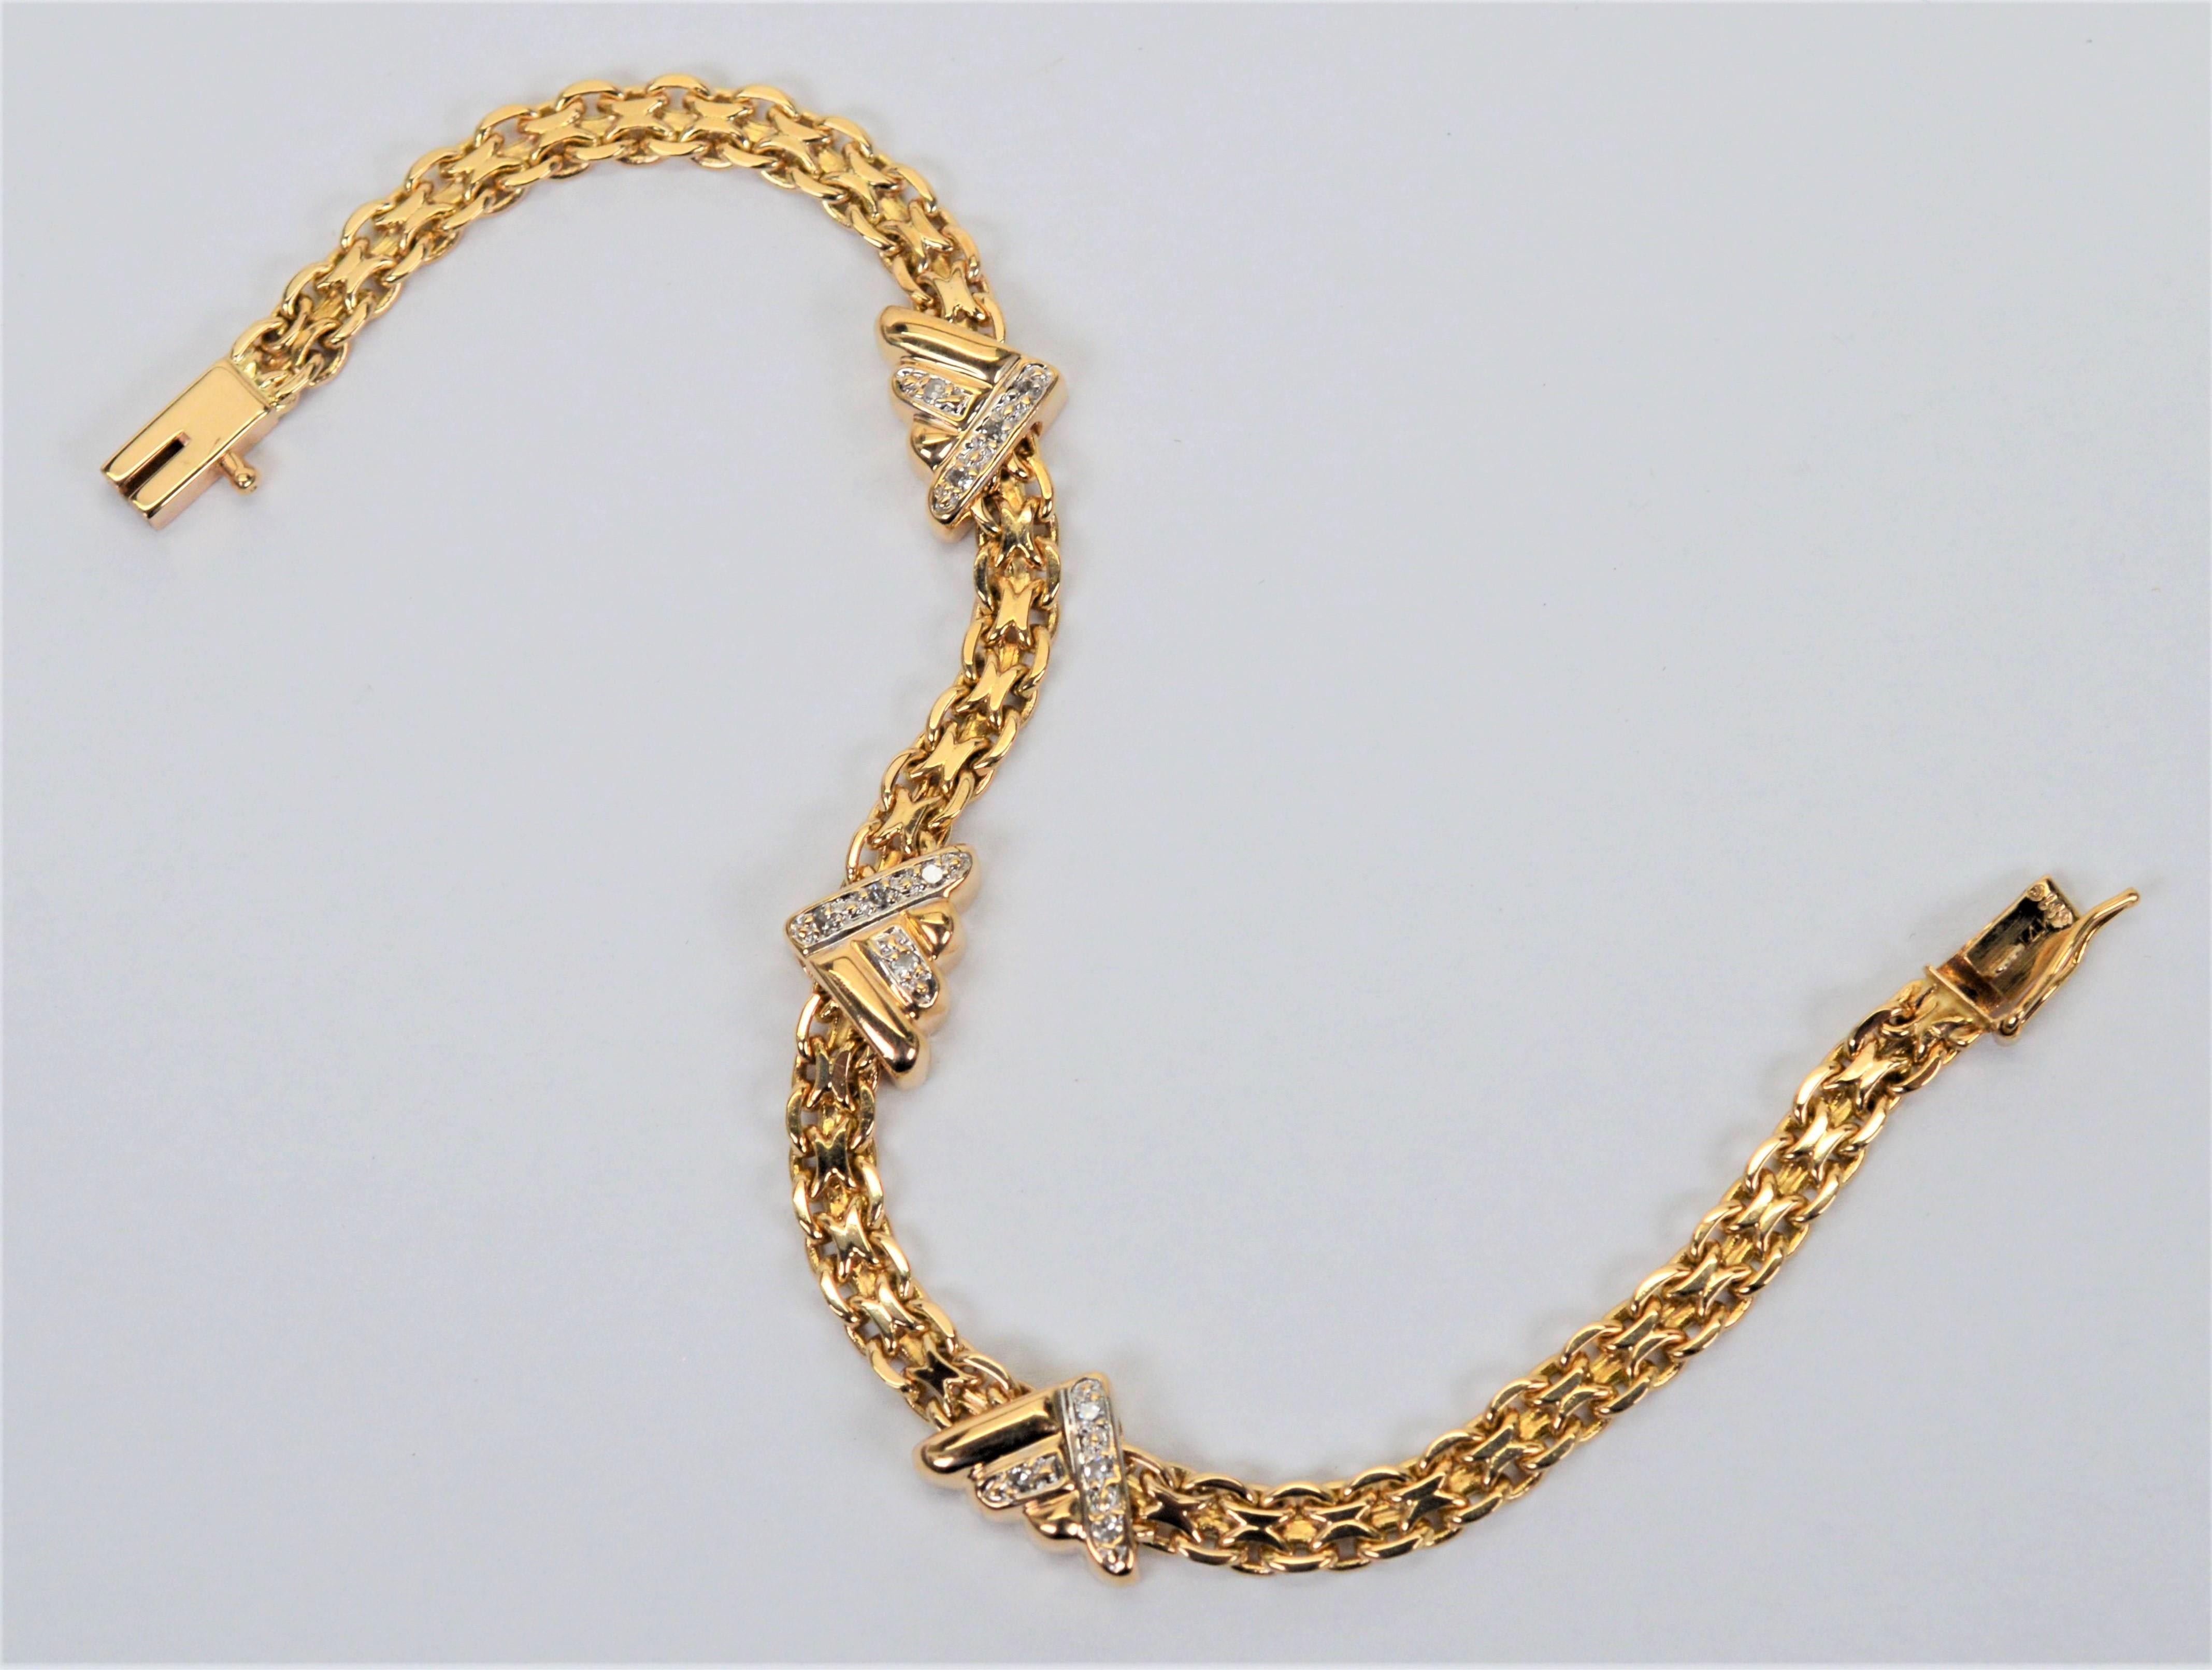 A unique mix of styles creates this ultra feminine wristlet. In fourteen karat yellow gold, its fancy 3.8mm wide Bismarck style chain bracelet resembles the profile of a slender tennis bracelet but in precious metal as it modestly presents three